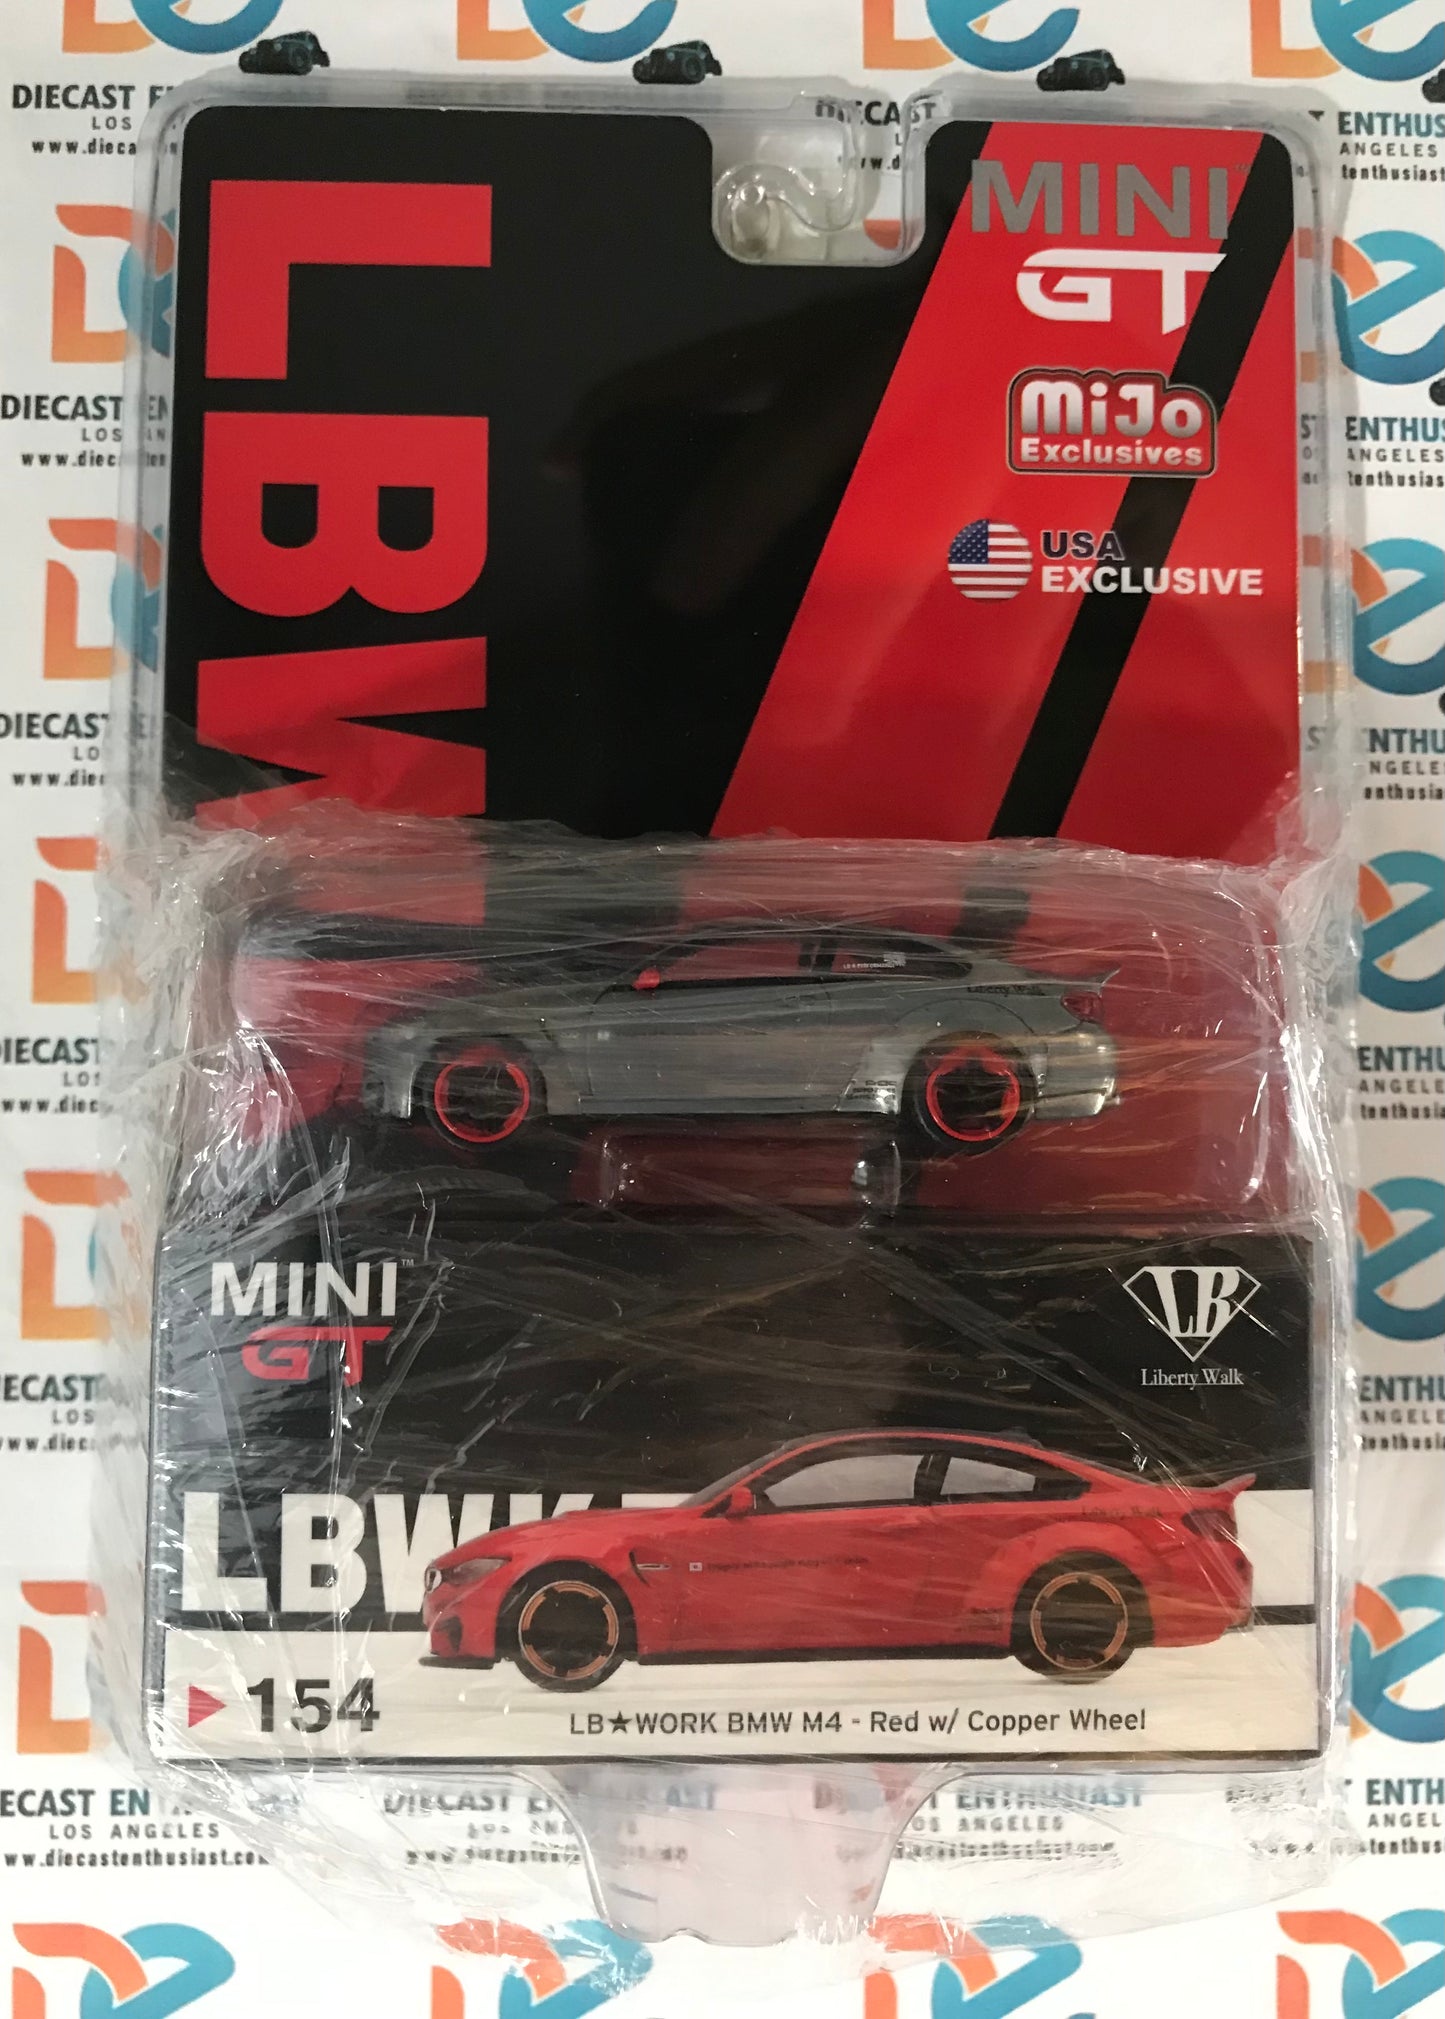 CHASE RAW Mini GT Mijo Exclusive 154 LBWK BMW M4 Red Copper Wheels 1:64